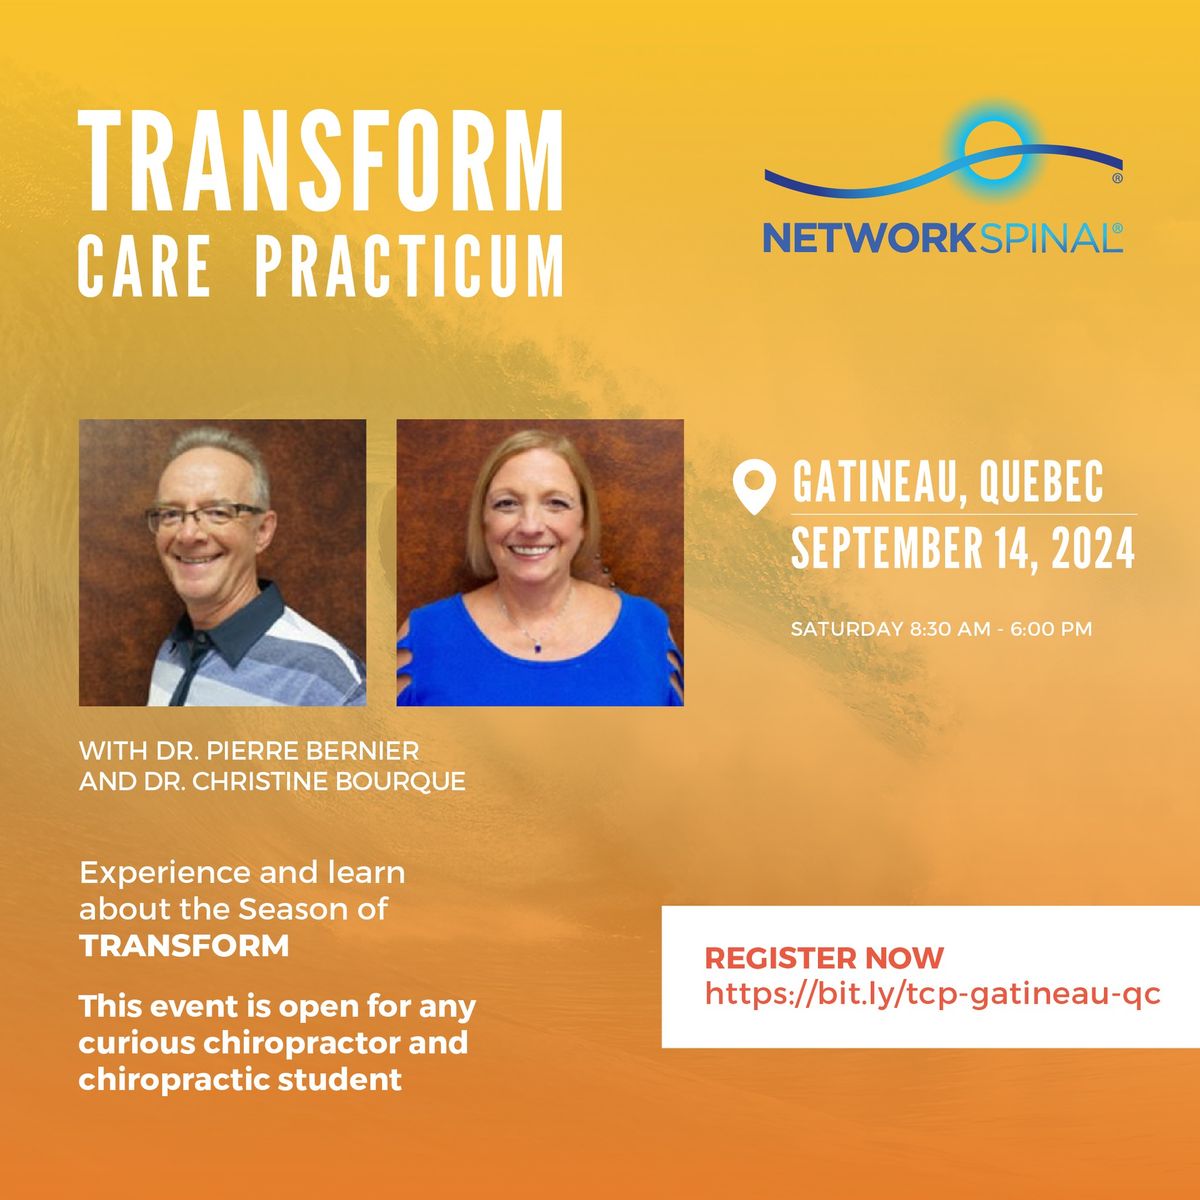 NetworkSpinal Transform Care Practicum with Dr. Pierre Bernier and Dr. Christine Bourque